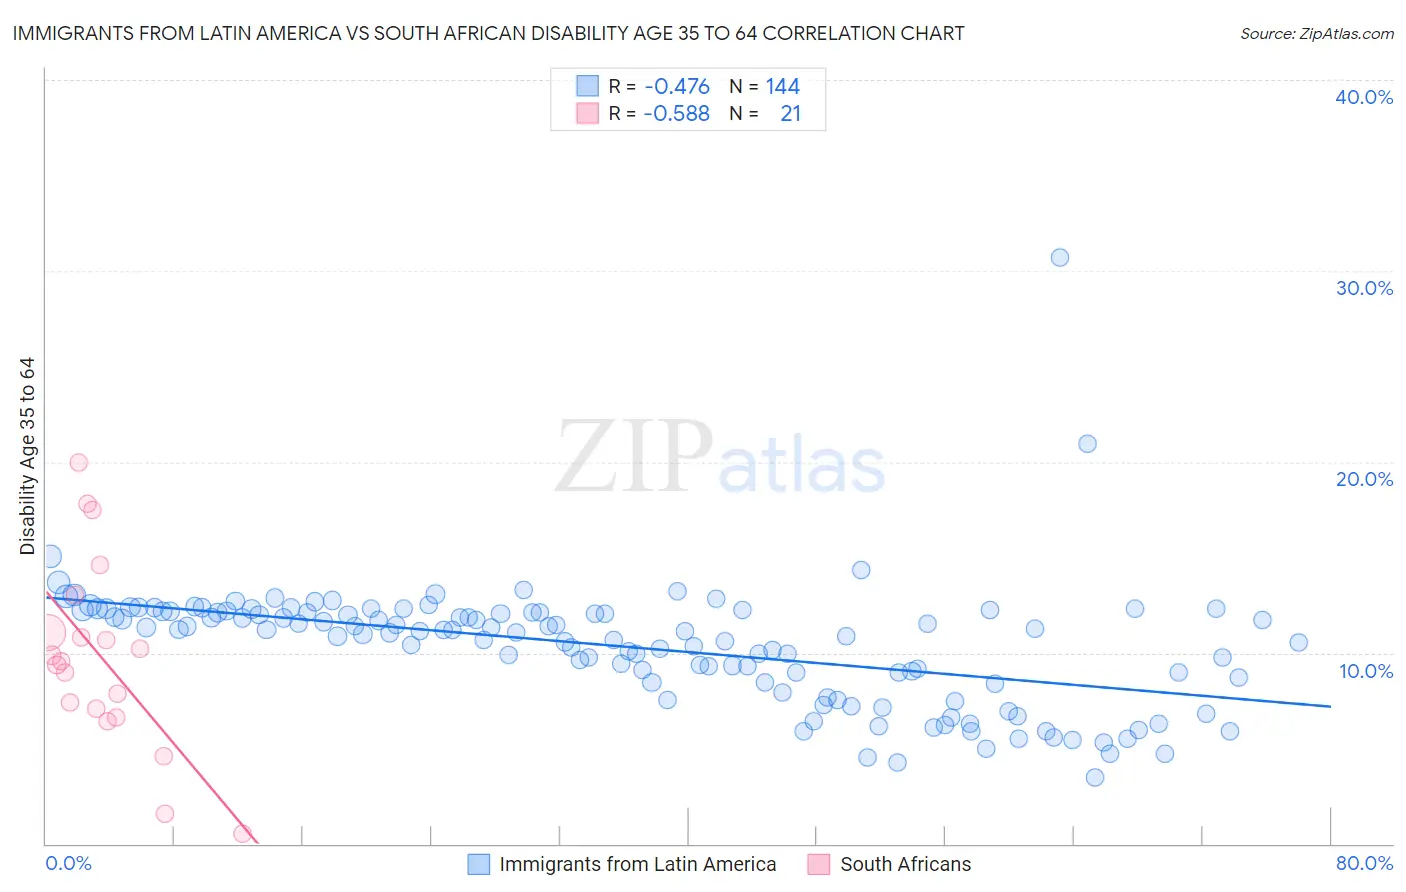 Immigrants from Latin America vs South African Disability Age 35 to 64